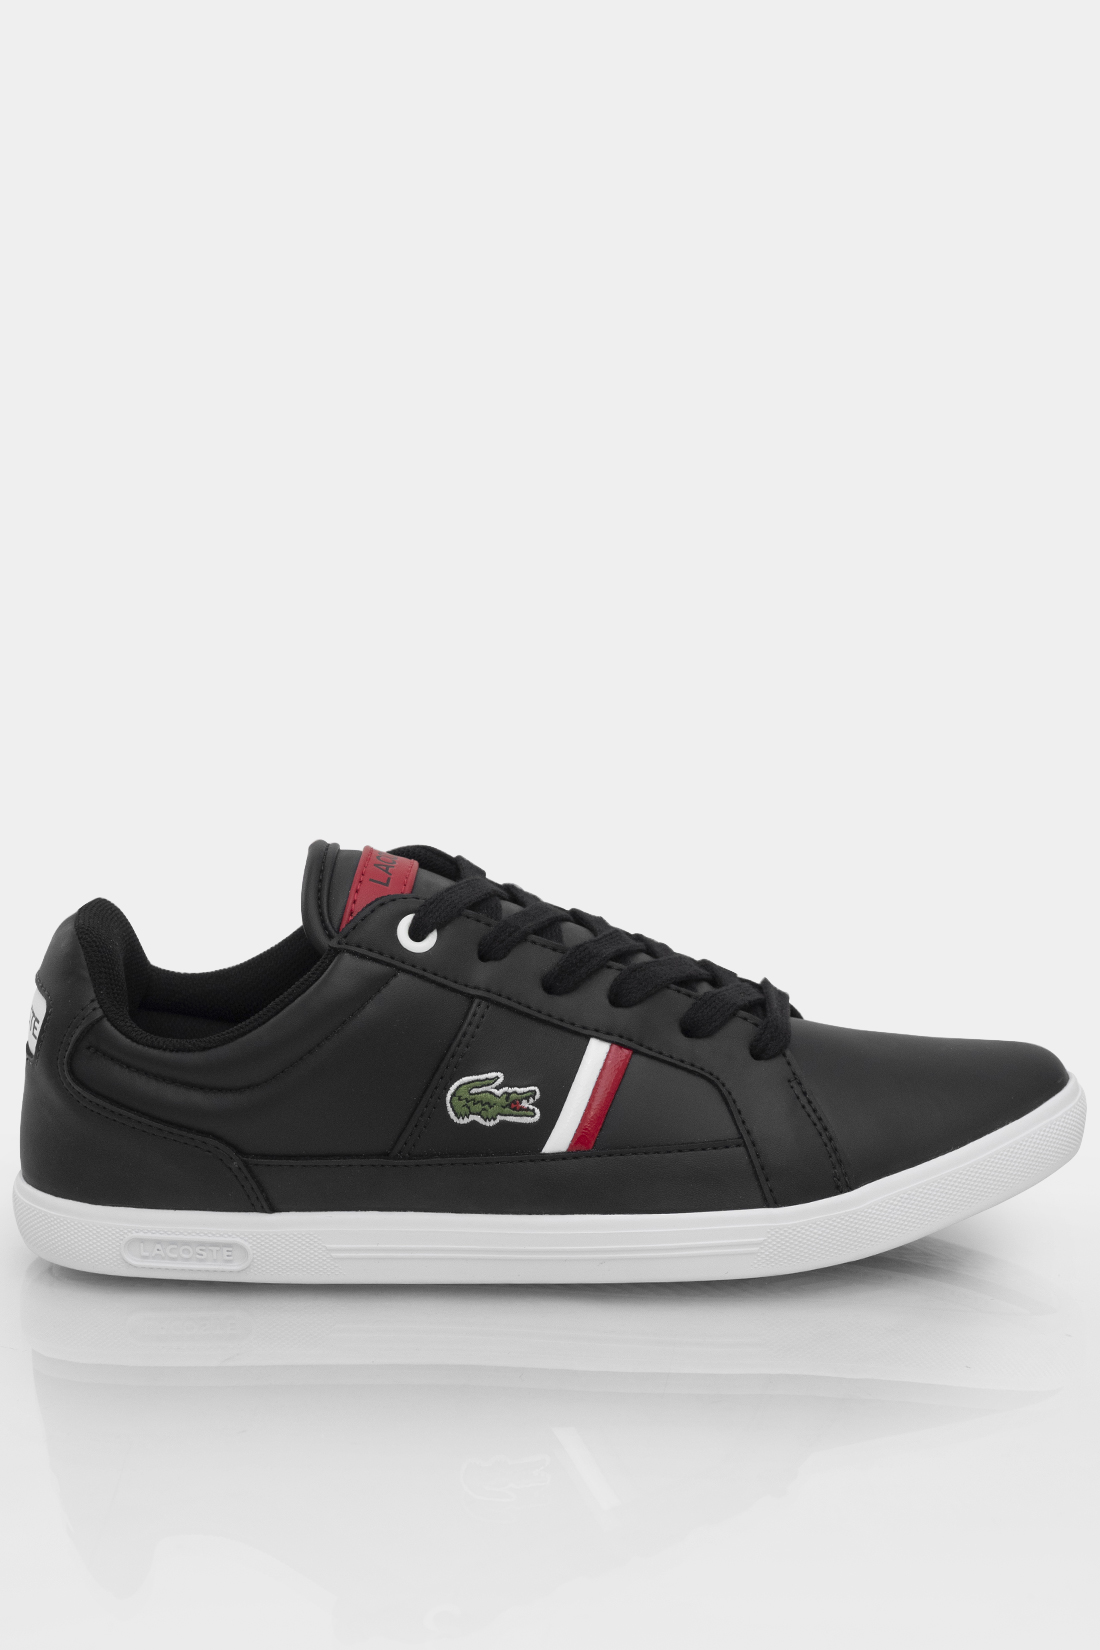 Tenis Casual Lacoste Listra